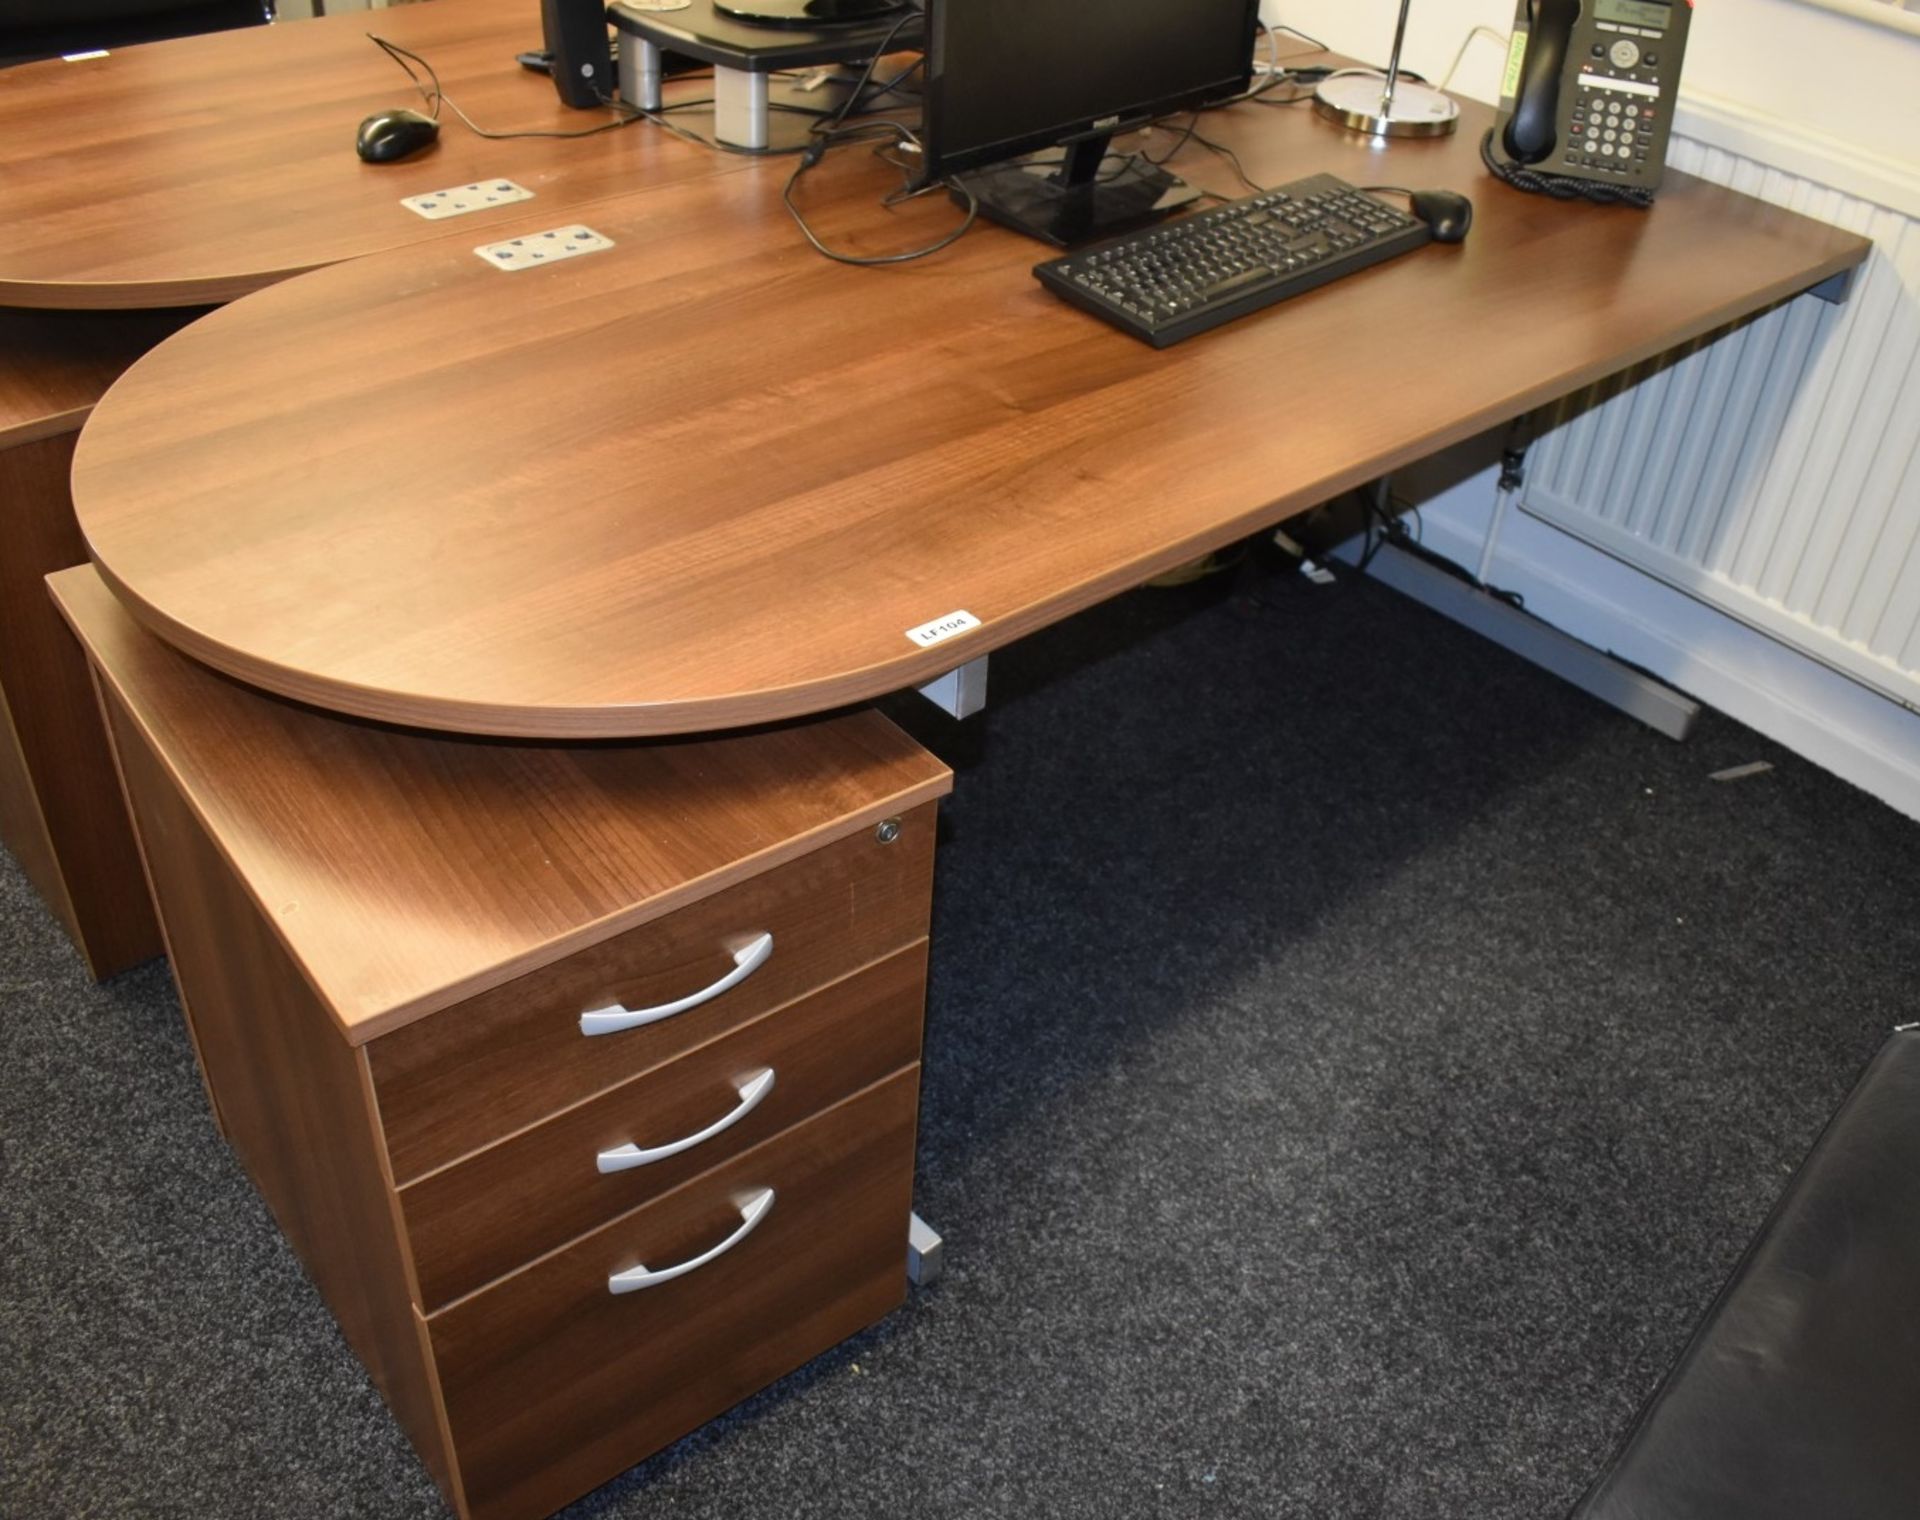 1 x Contemporary Office Desk - Features Semi Circle Meeting Point, Walnut Finish and Matching Drawer